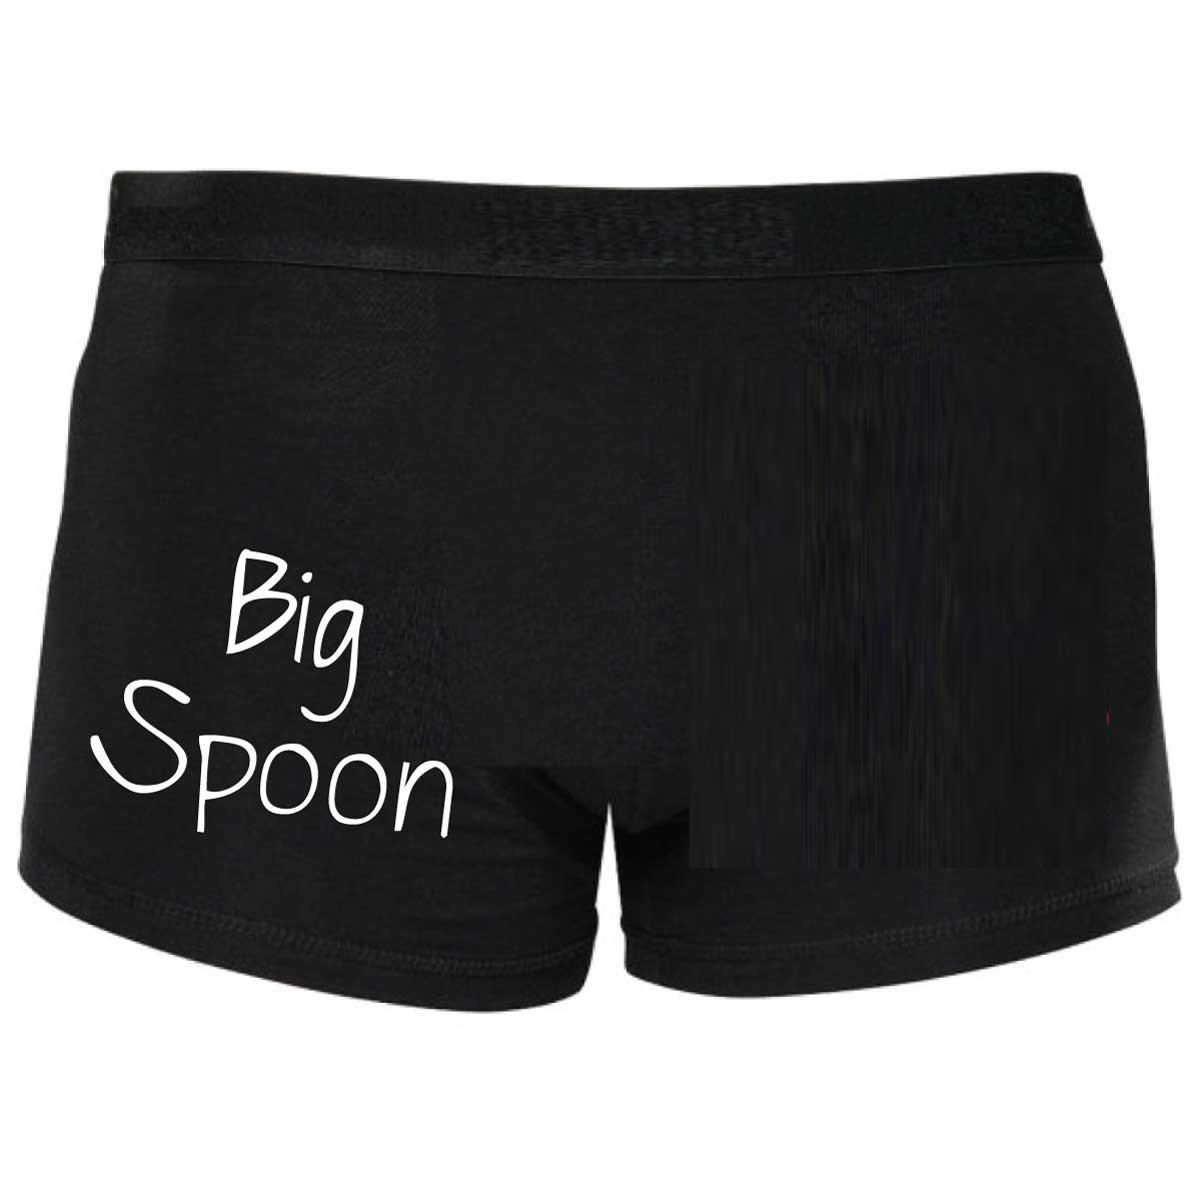 Big Spoon Boxers Shorty Boxers